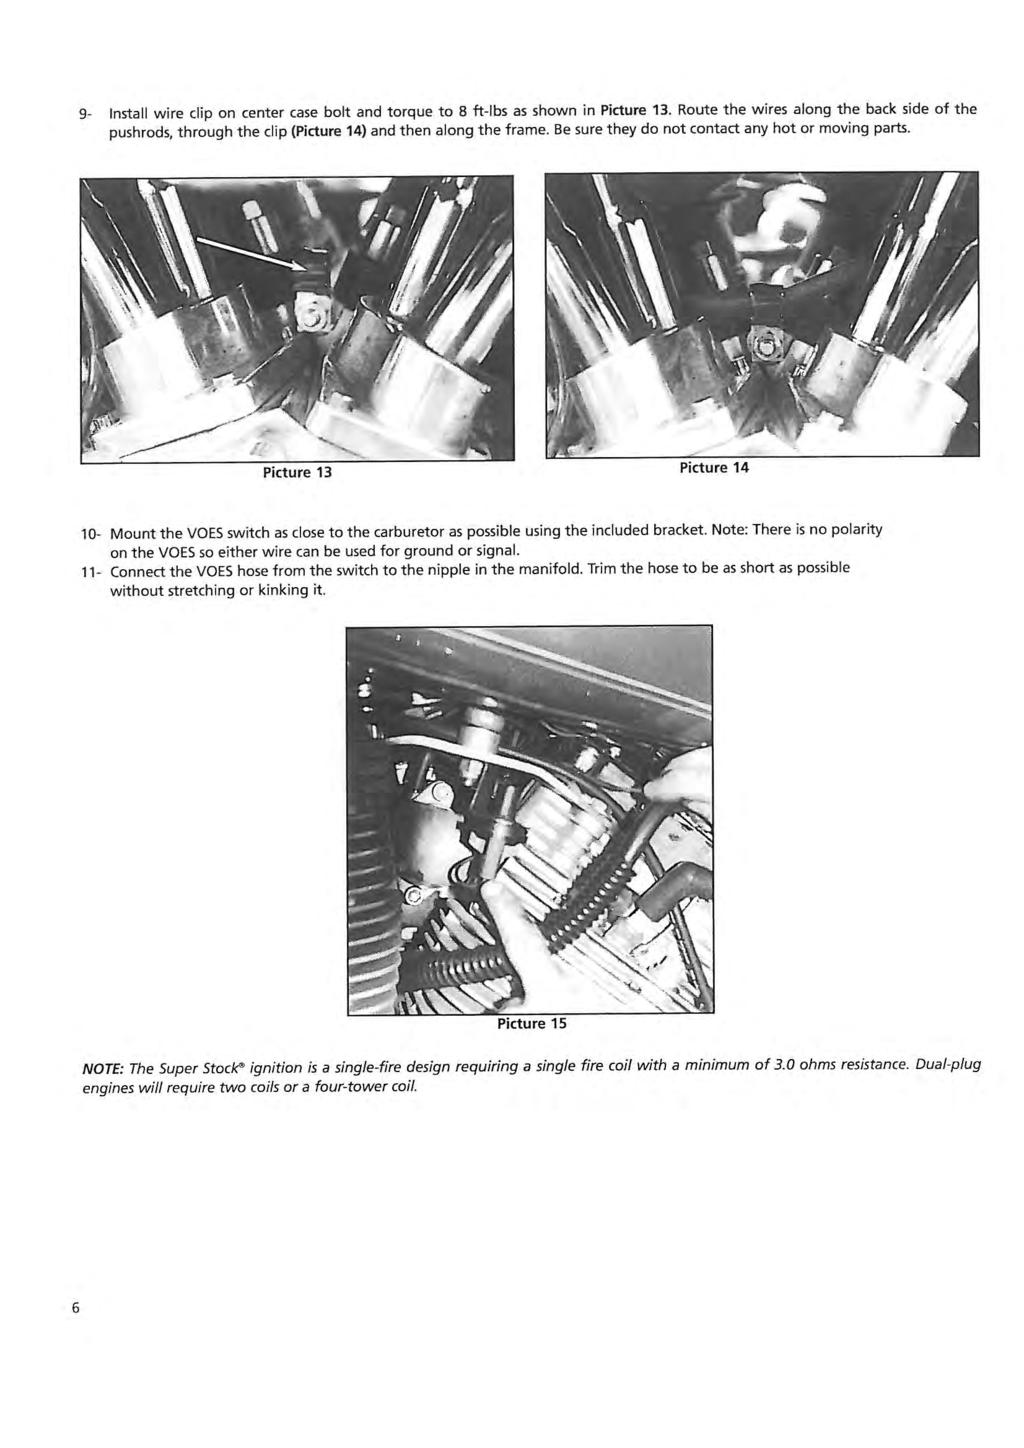 9- Install wire clip on center case bolt and torque to 8 ft-lbs as shown in Picture 13. Route the wires along the back side of the pushrods, through the clip (Picture 14) and then along the frame.